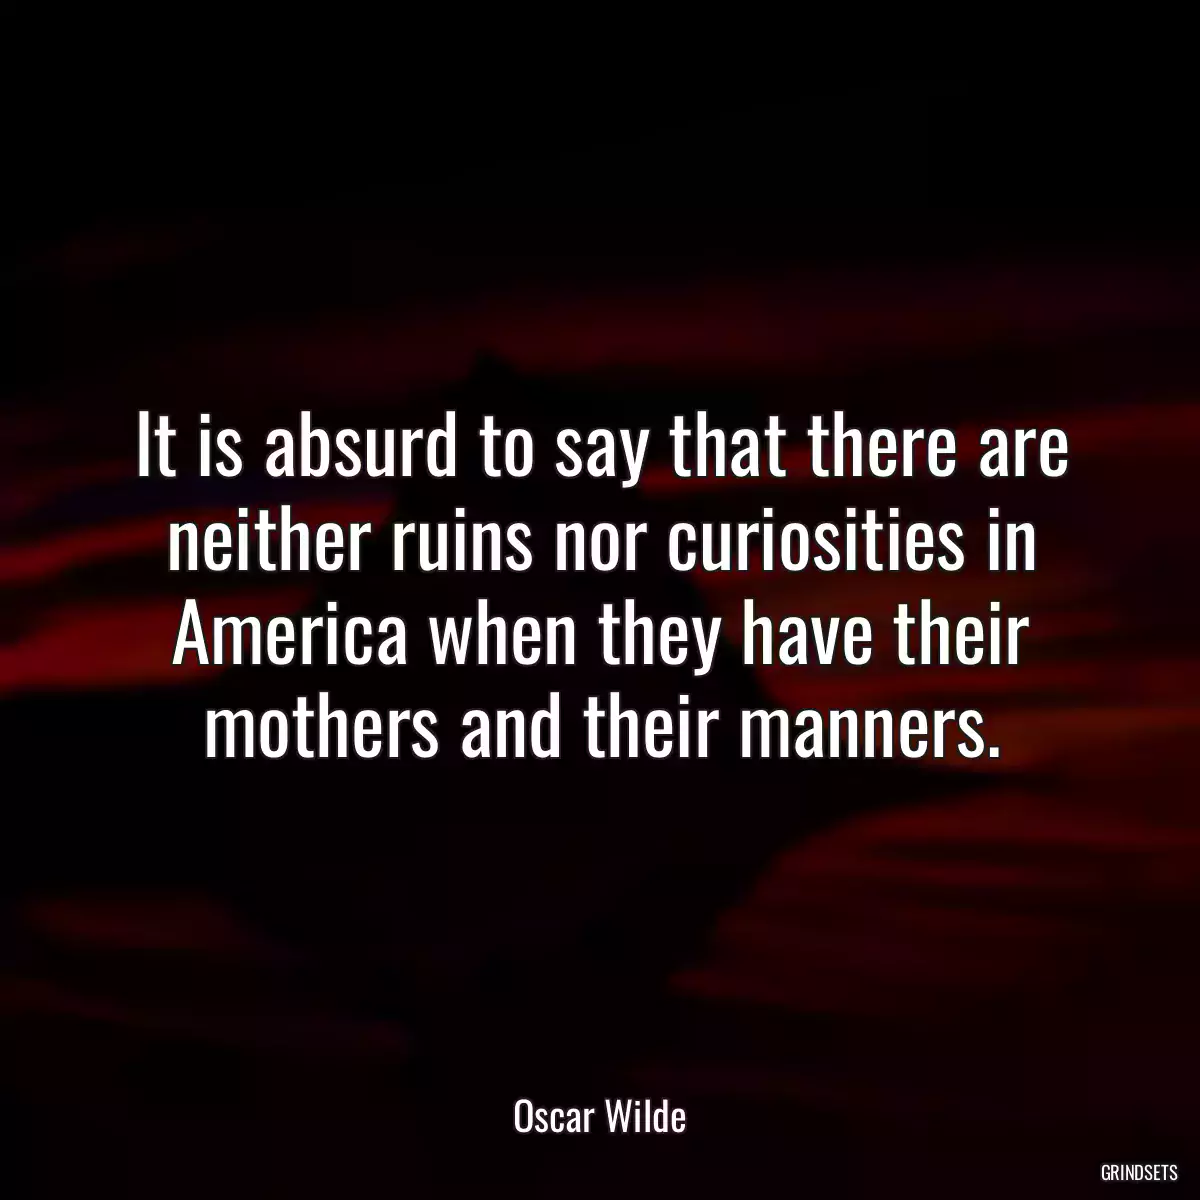 It is absurd to say that there are neither ruins nor curiosities in America when they have their mothers and their manners.